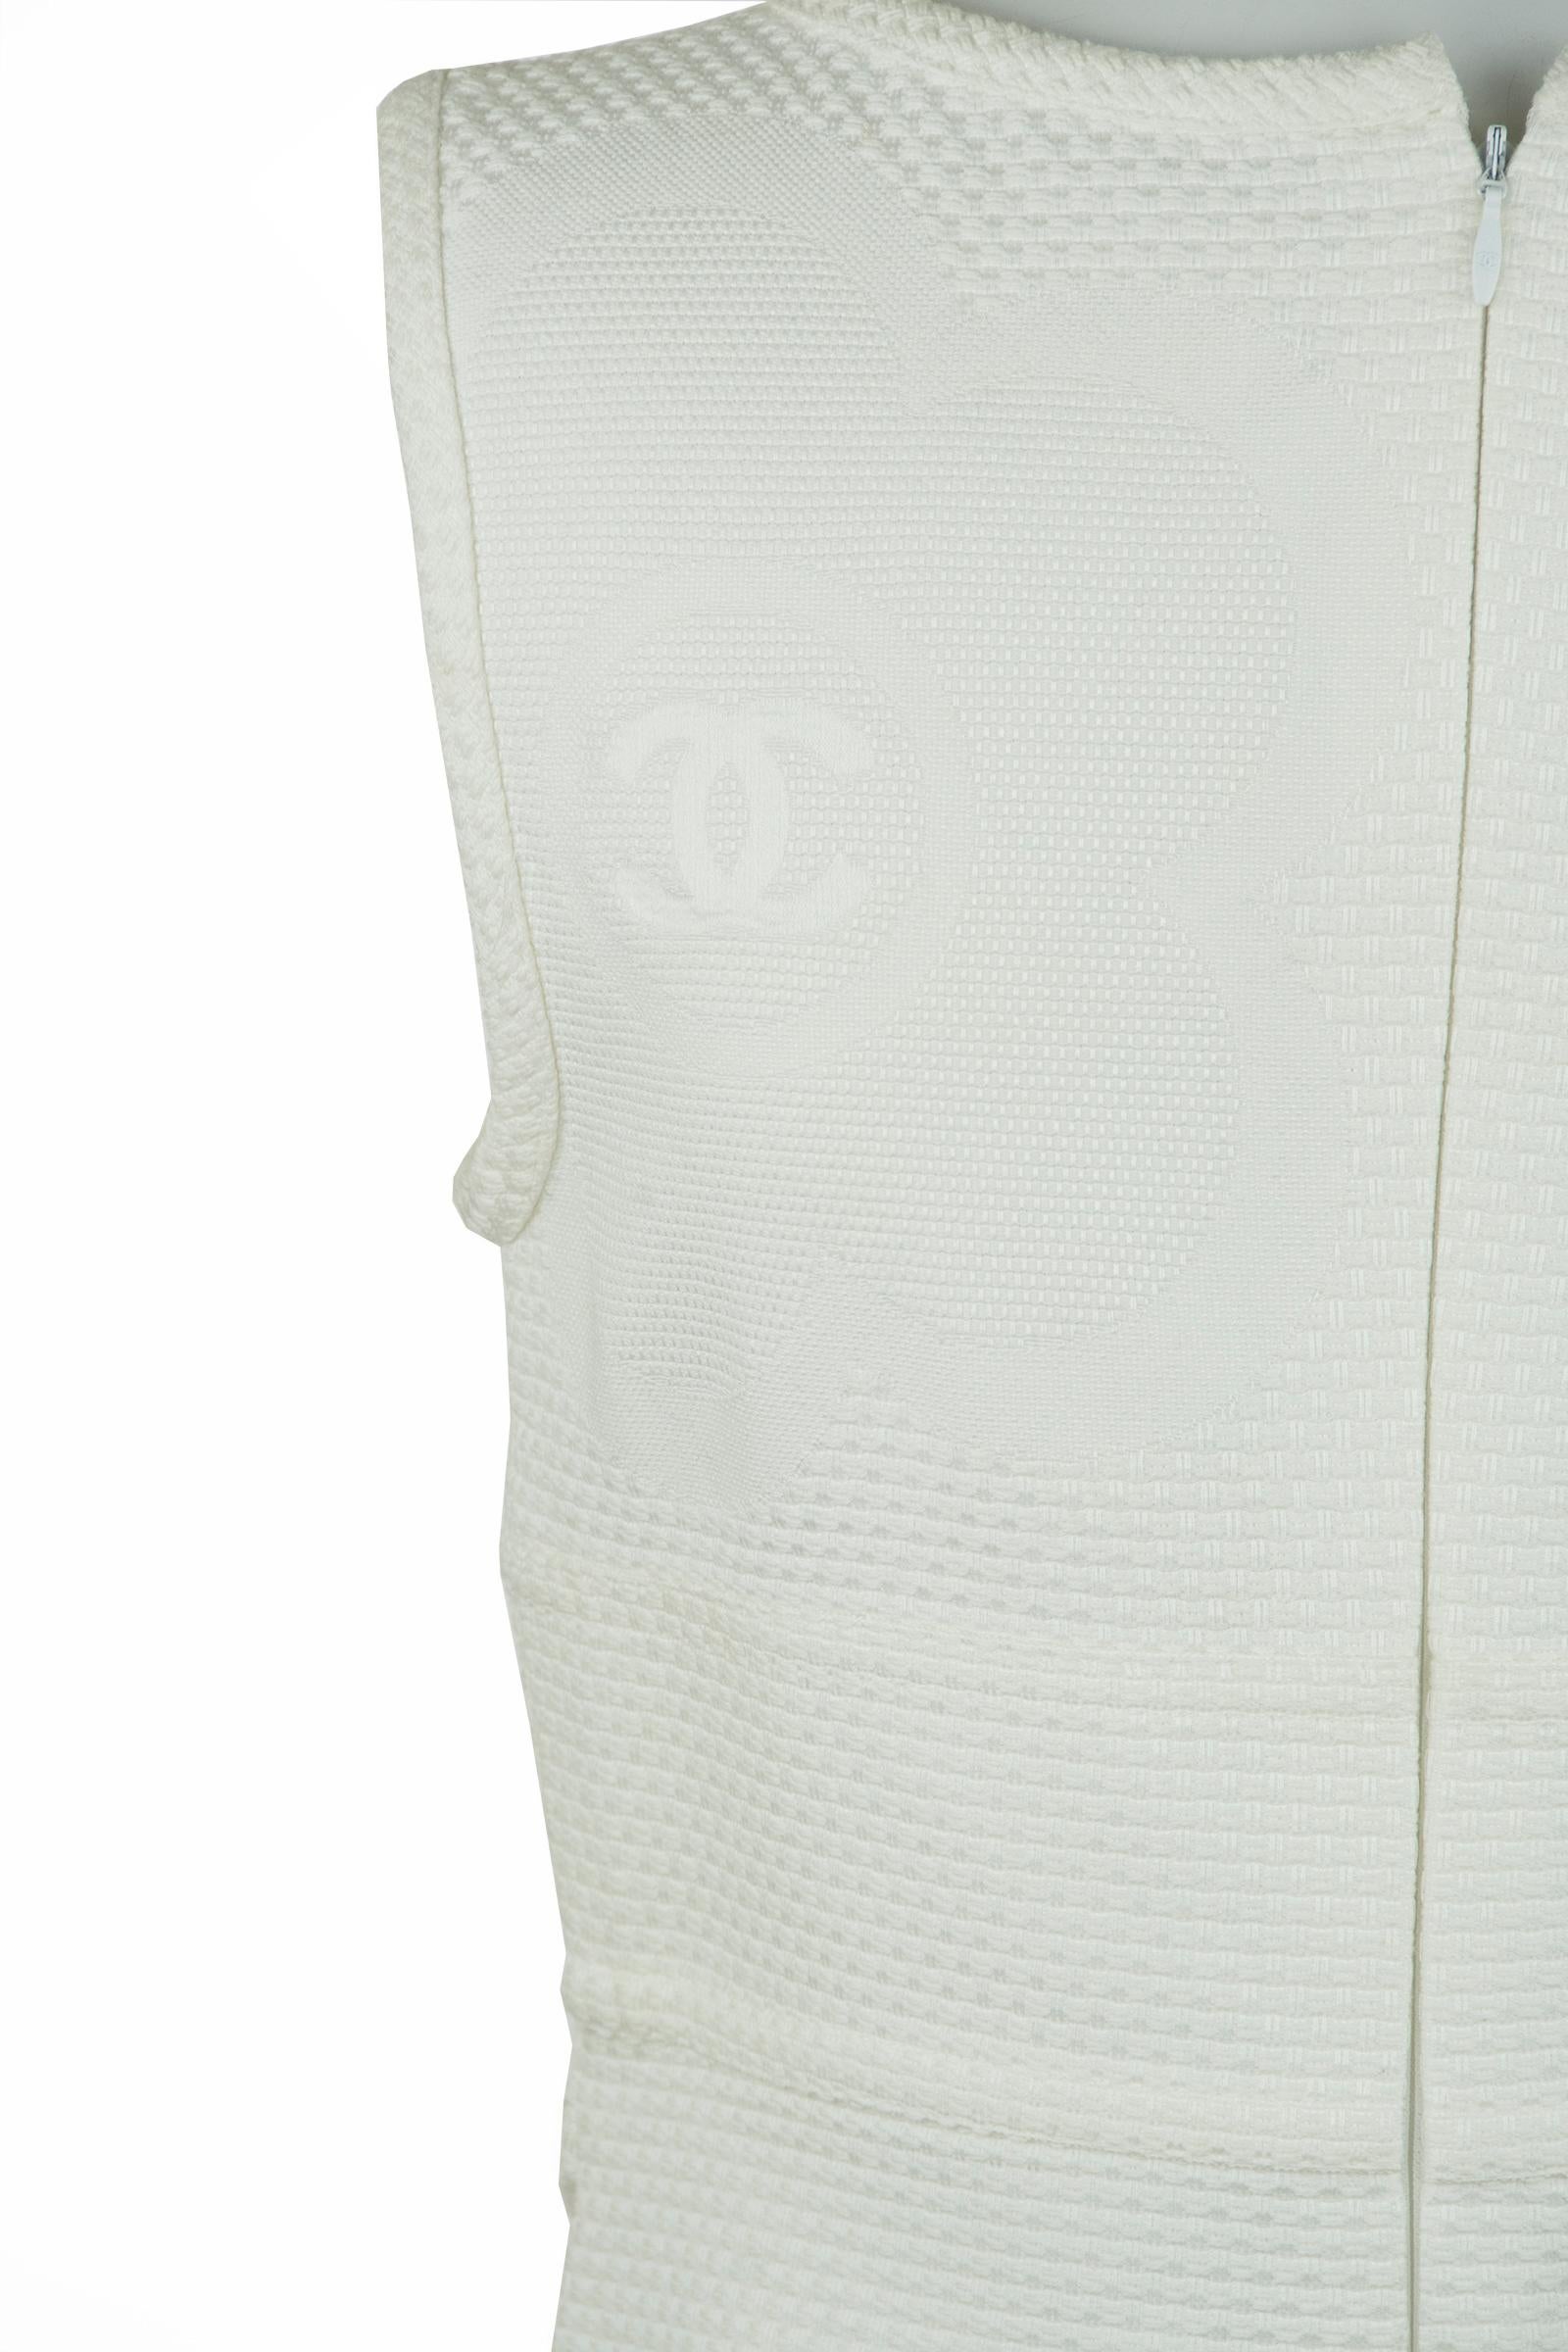 Chanel White Pique Dress In Excellent Condition For Sale In Newport, RI